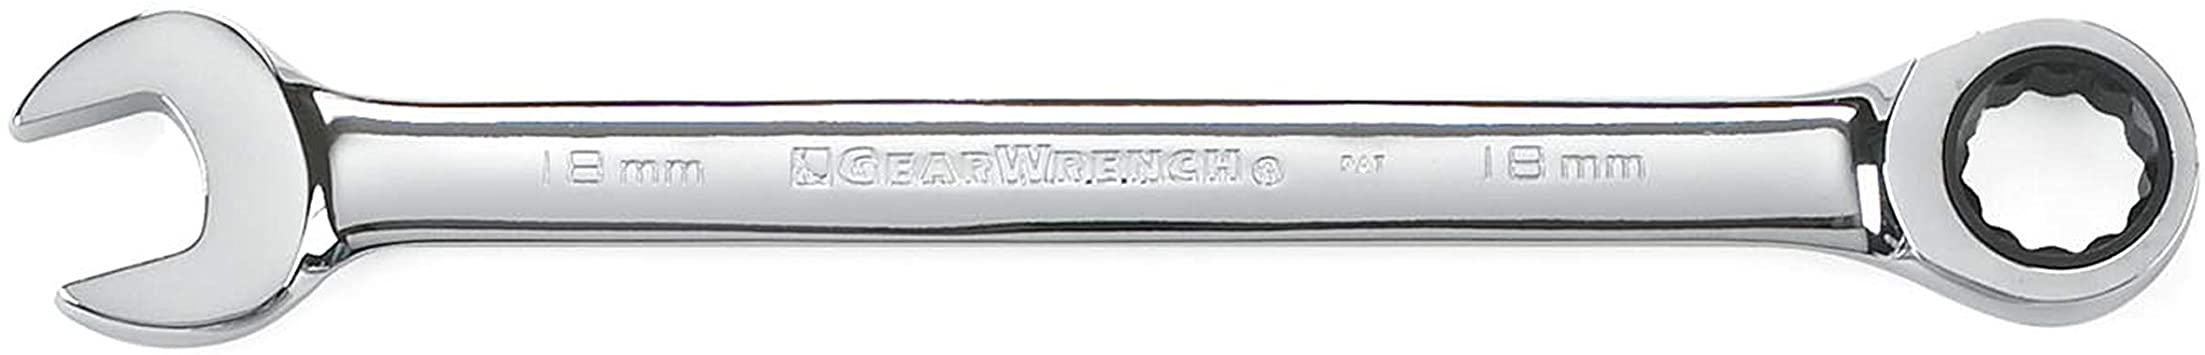 GEARWRENCH 12 Pt. Ratcheting Combination Wrench, 18mm - 9118D